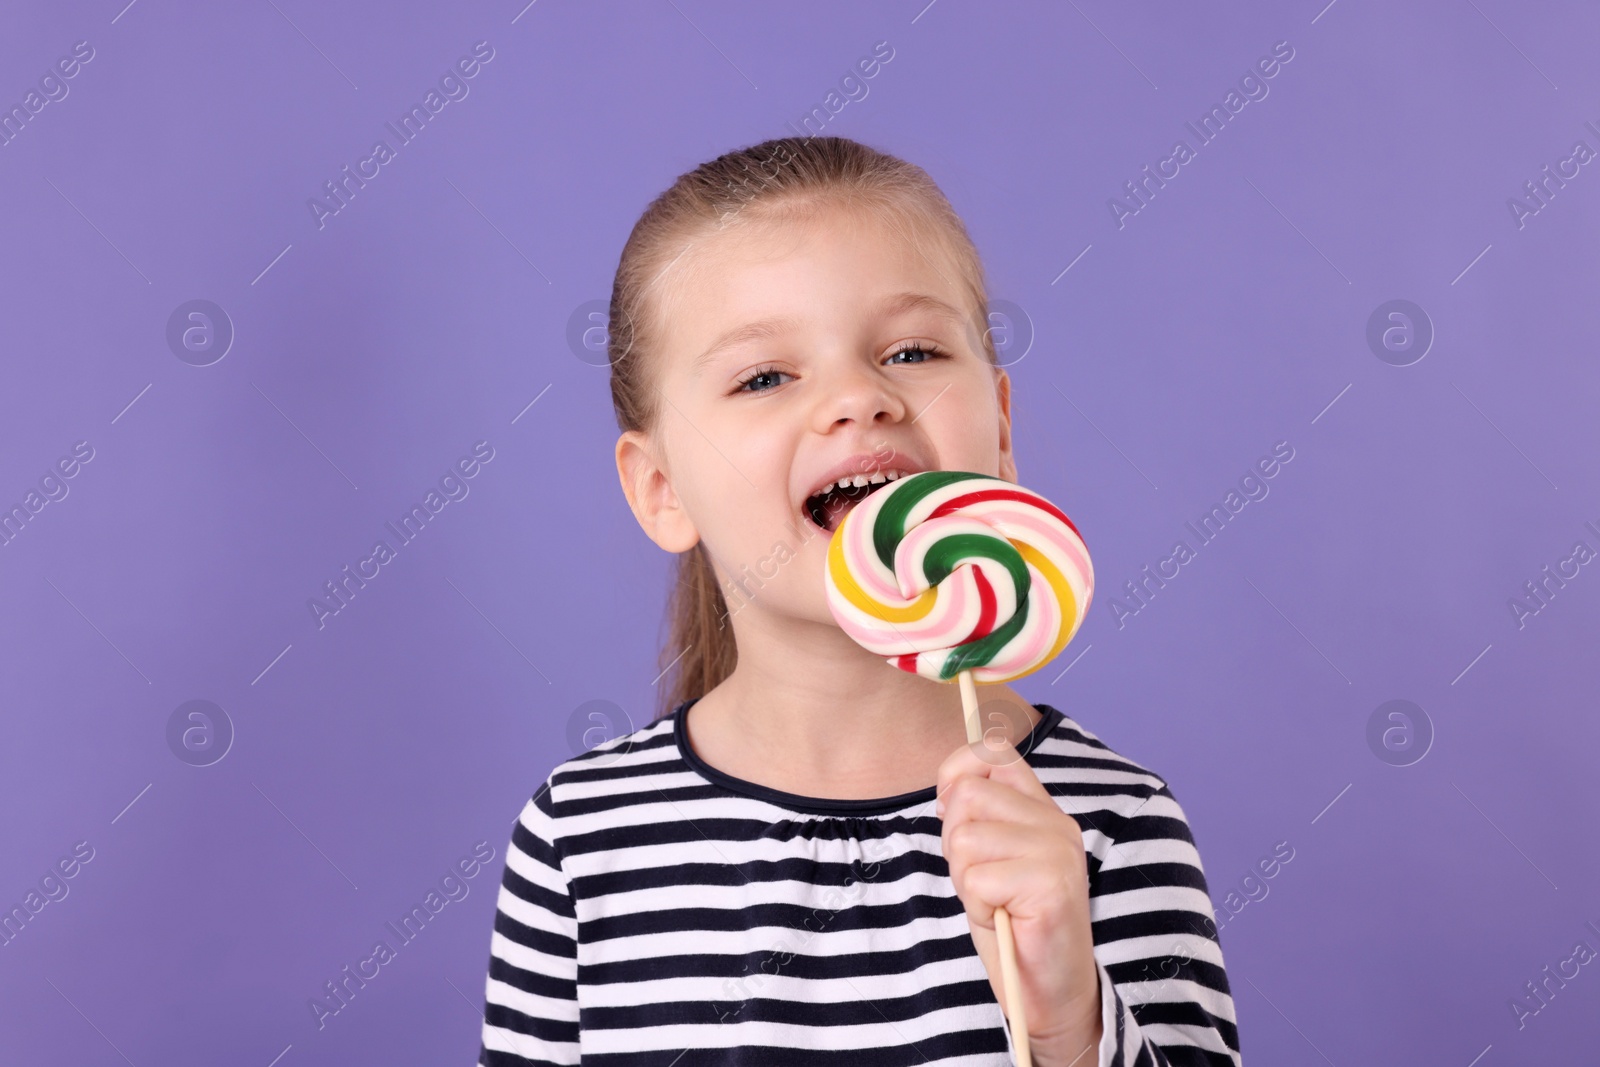 Photo of Happy little girl licking colorful lollipop swirl on violet background